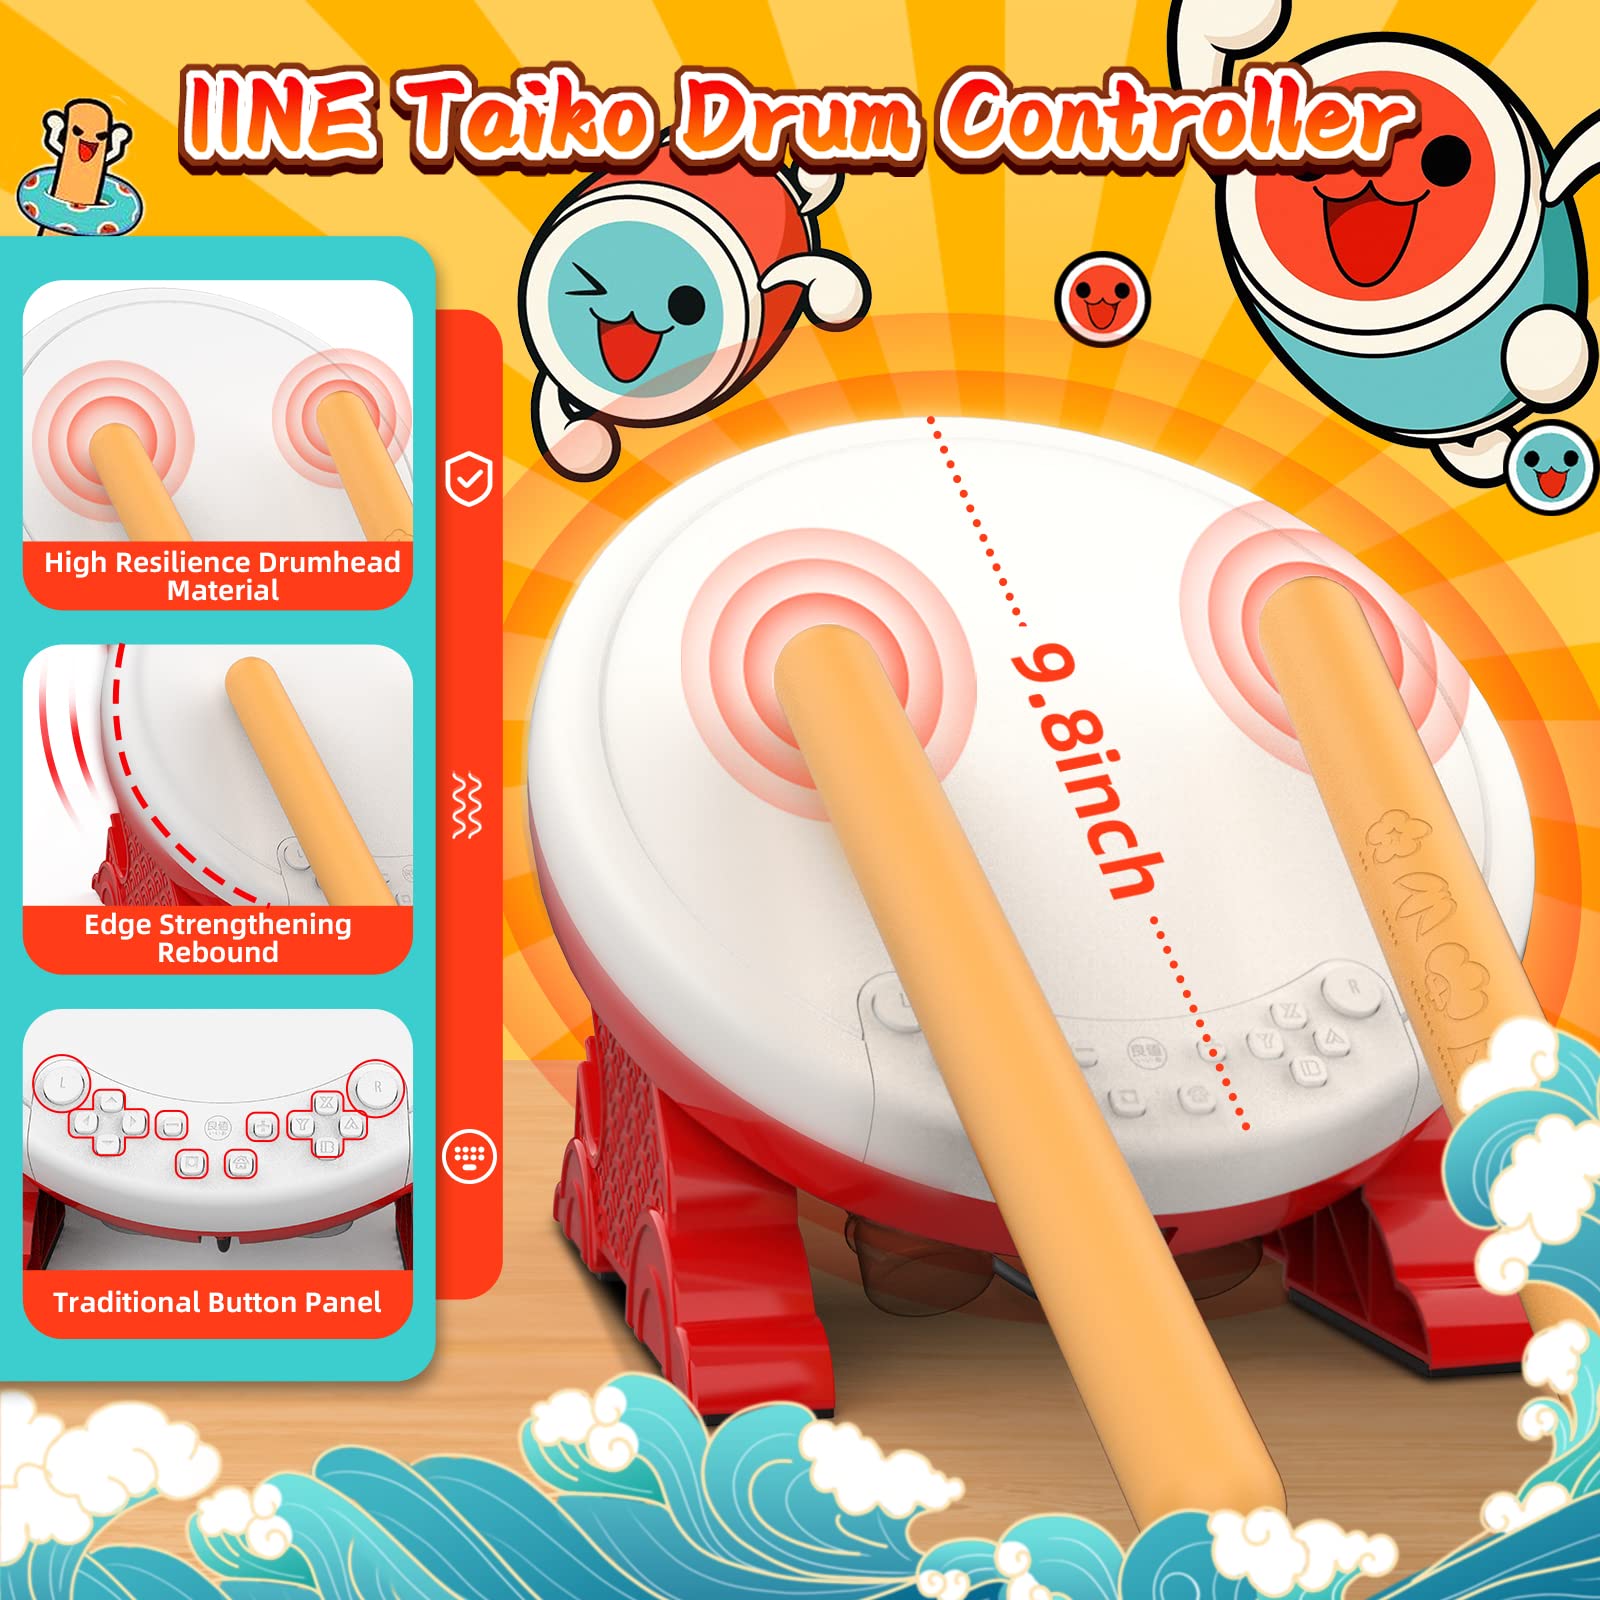 IINE Taiko Drum Controller for Nintendo Switch/PS4/PC, Taiko Game Controller with 2 Drum Sticks, Drum Controller for Taiko no Tatsujin Game